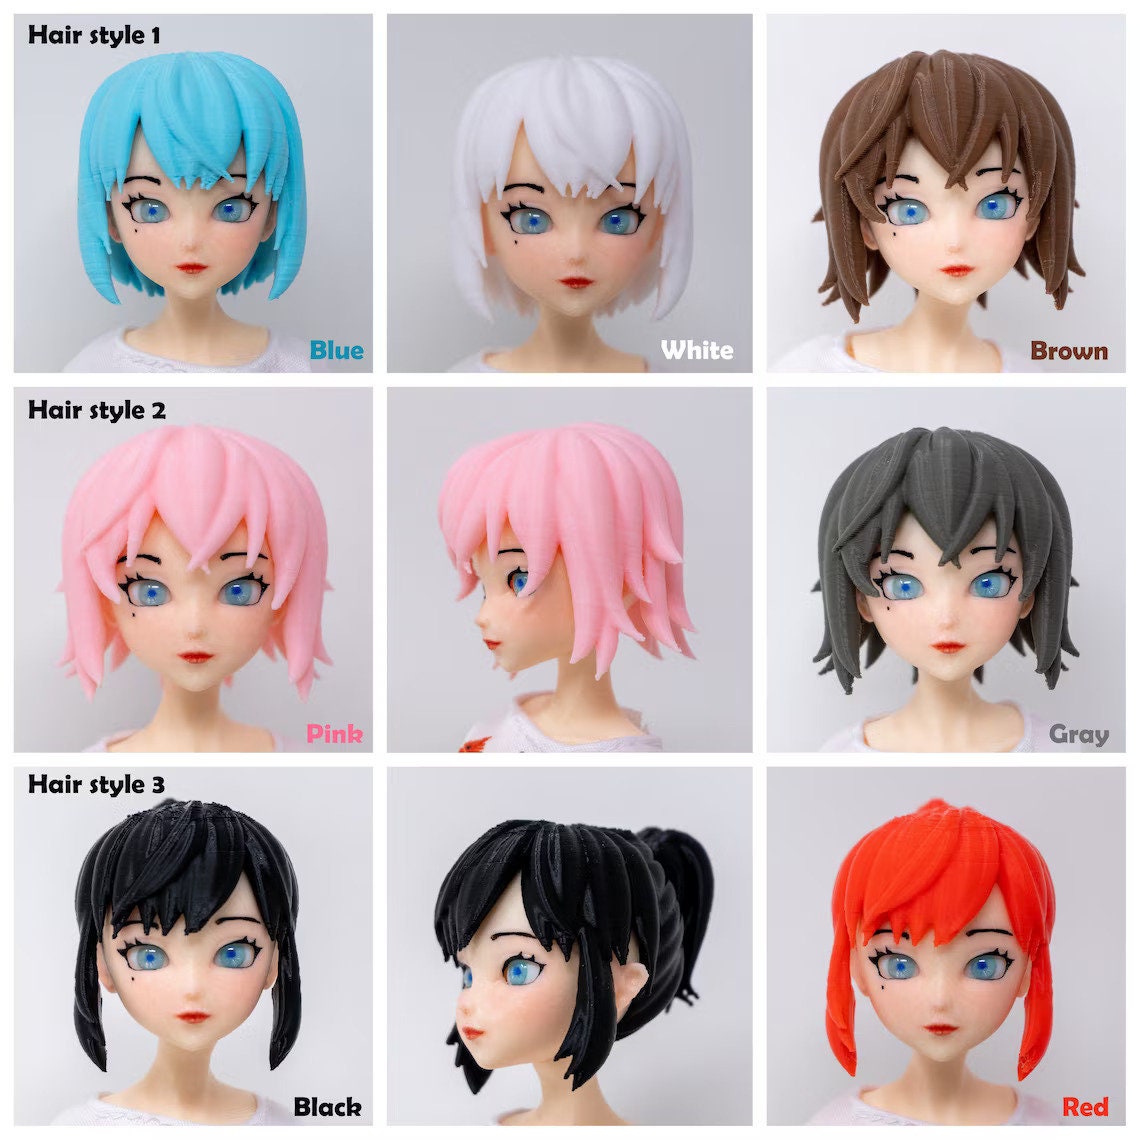 Anime 3d Eyes Bjd Doll Body 1/6 Manga Face Spherical Joint Nude Haploid ​ doll With Varied Hairs Accessories For Girls Toys - Bjd Dolls - AliExpress